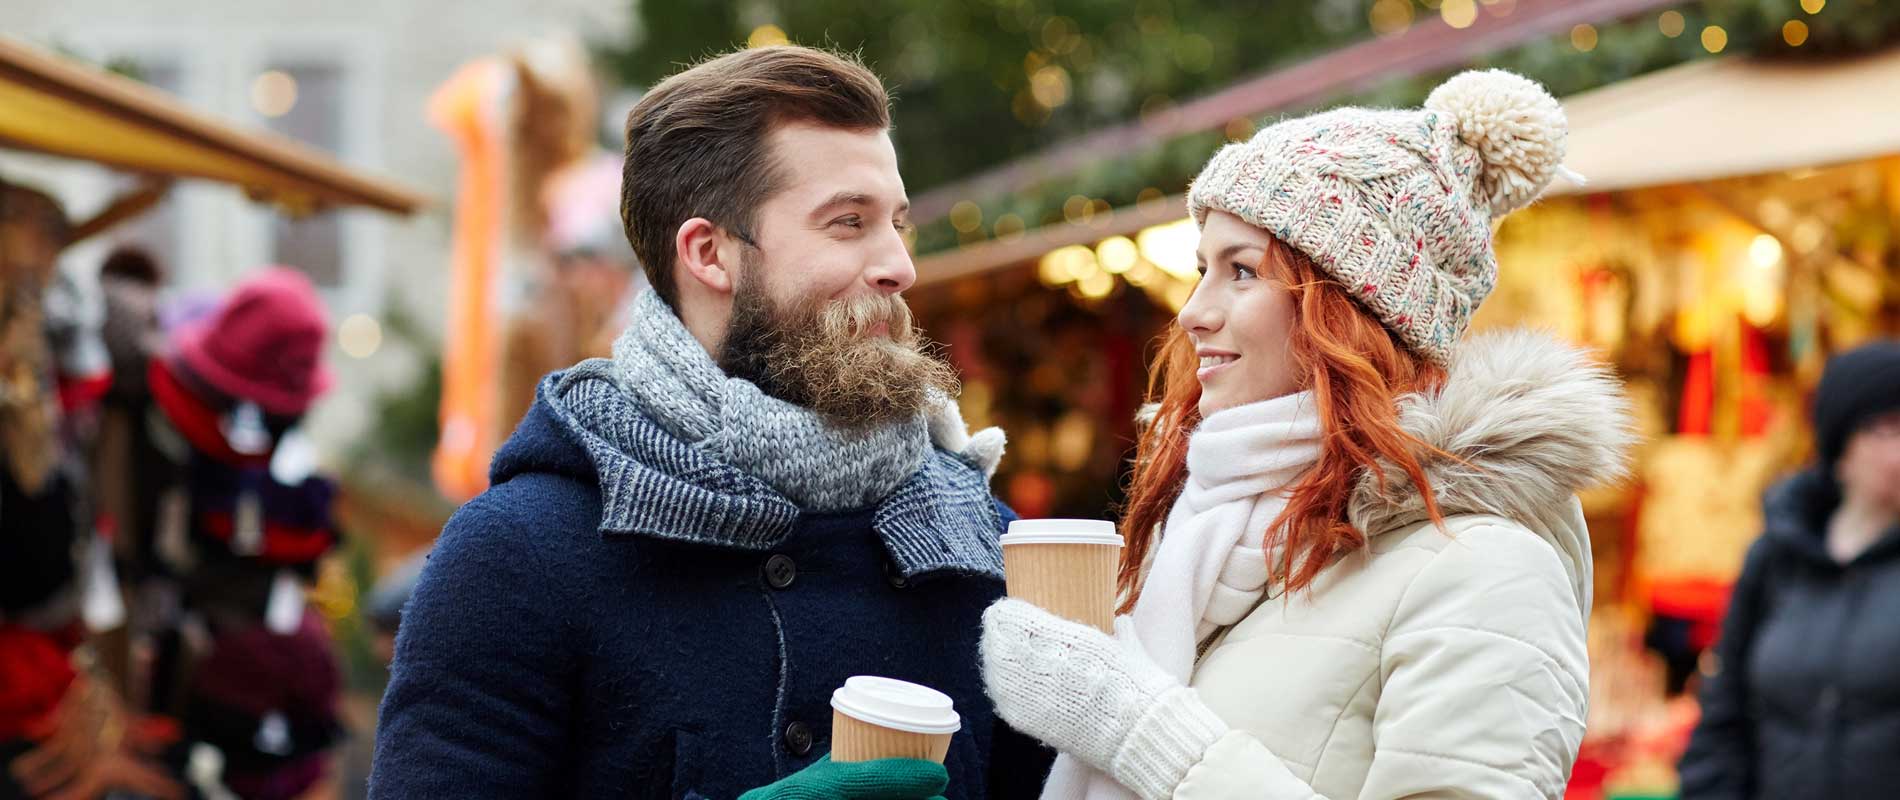 Couple in winter clothes with coffee cups at a winter market